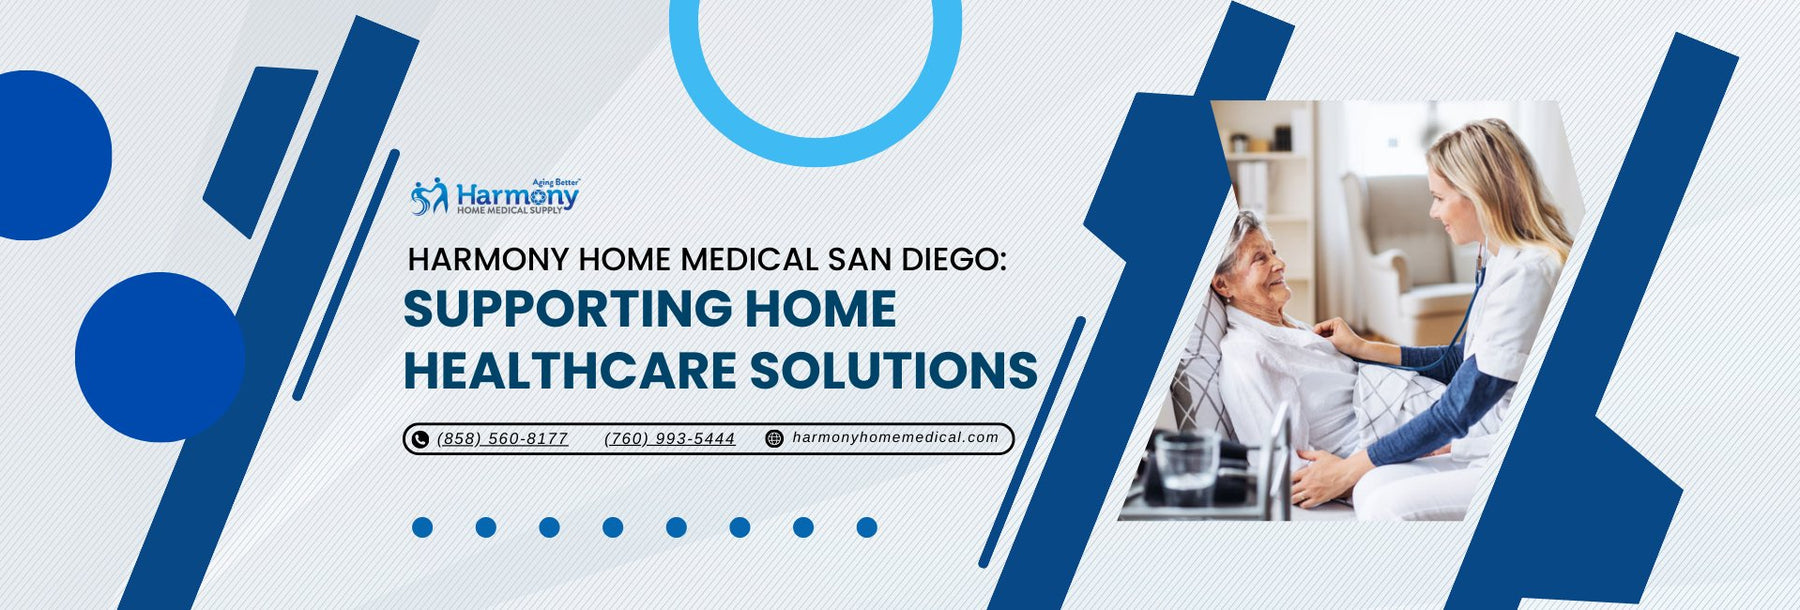 Harmony Home Medical Equipment San Diego: Supporting Home Healthcare Solutions - Harmony Home Medical Supply